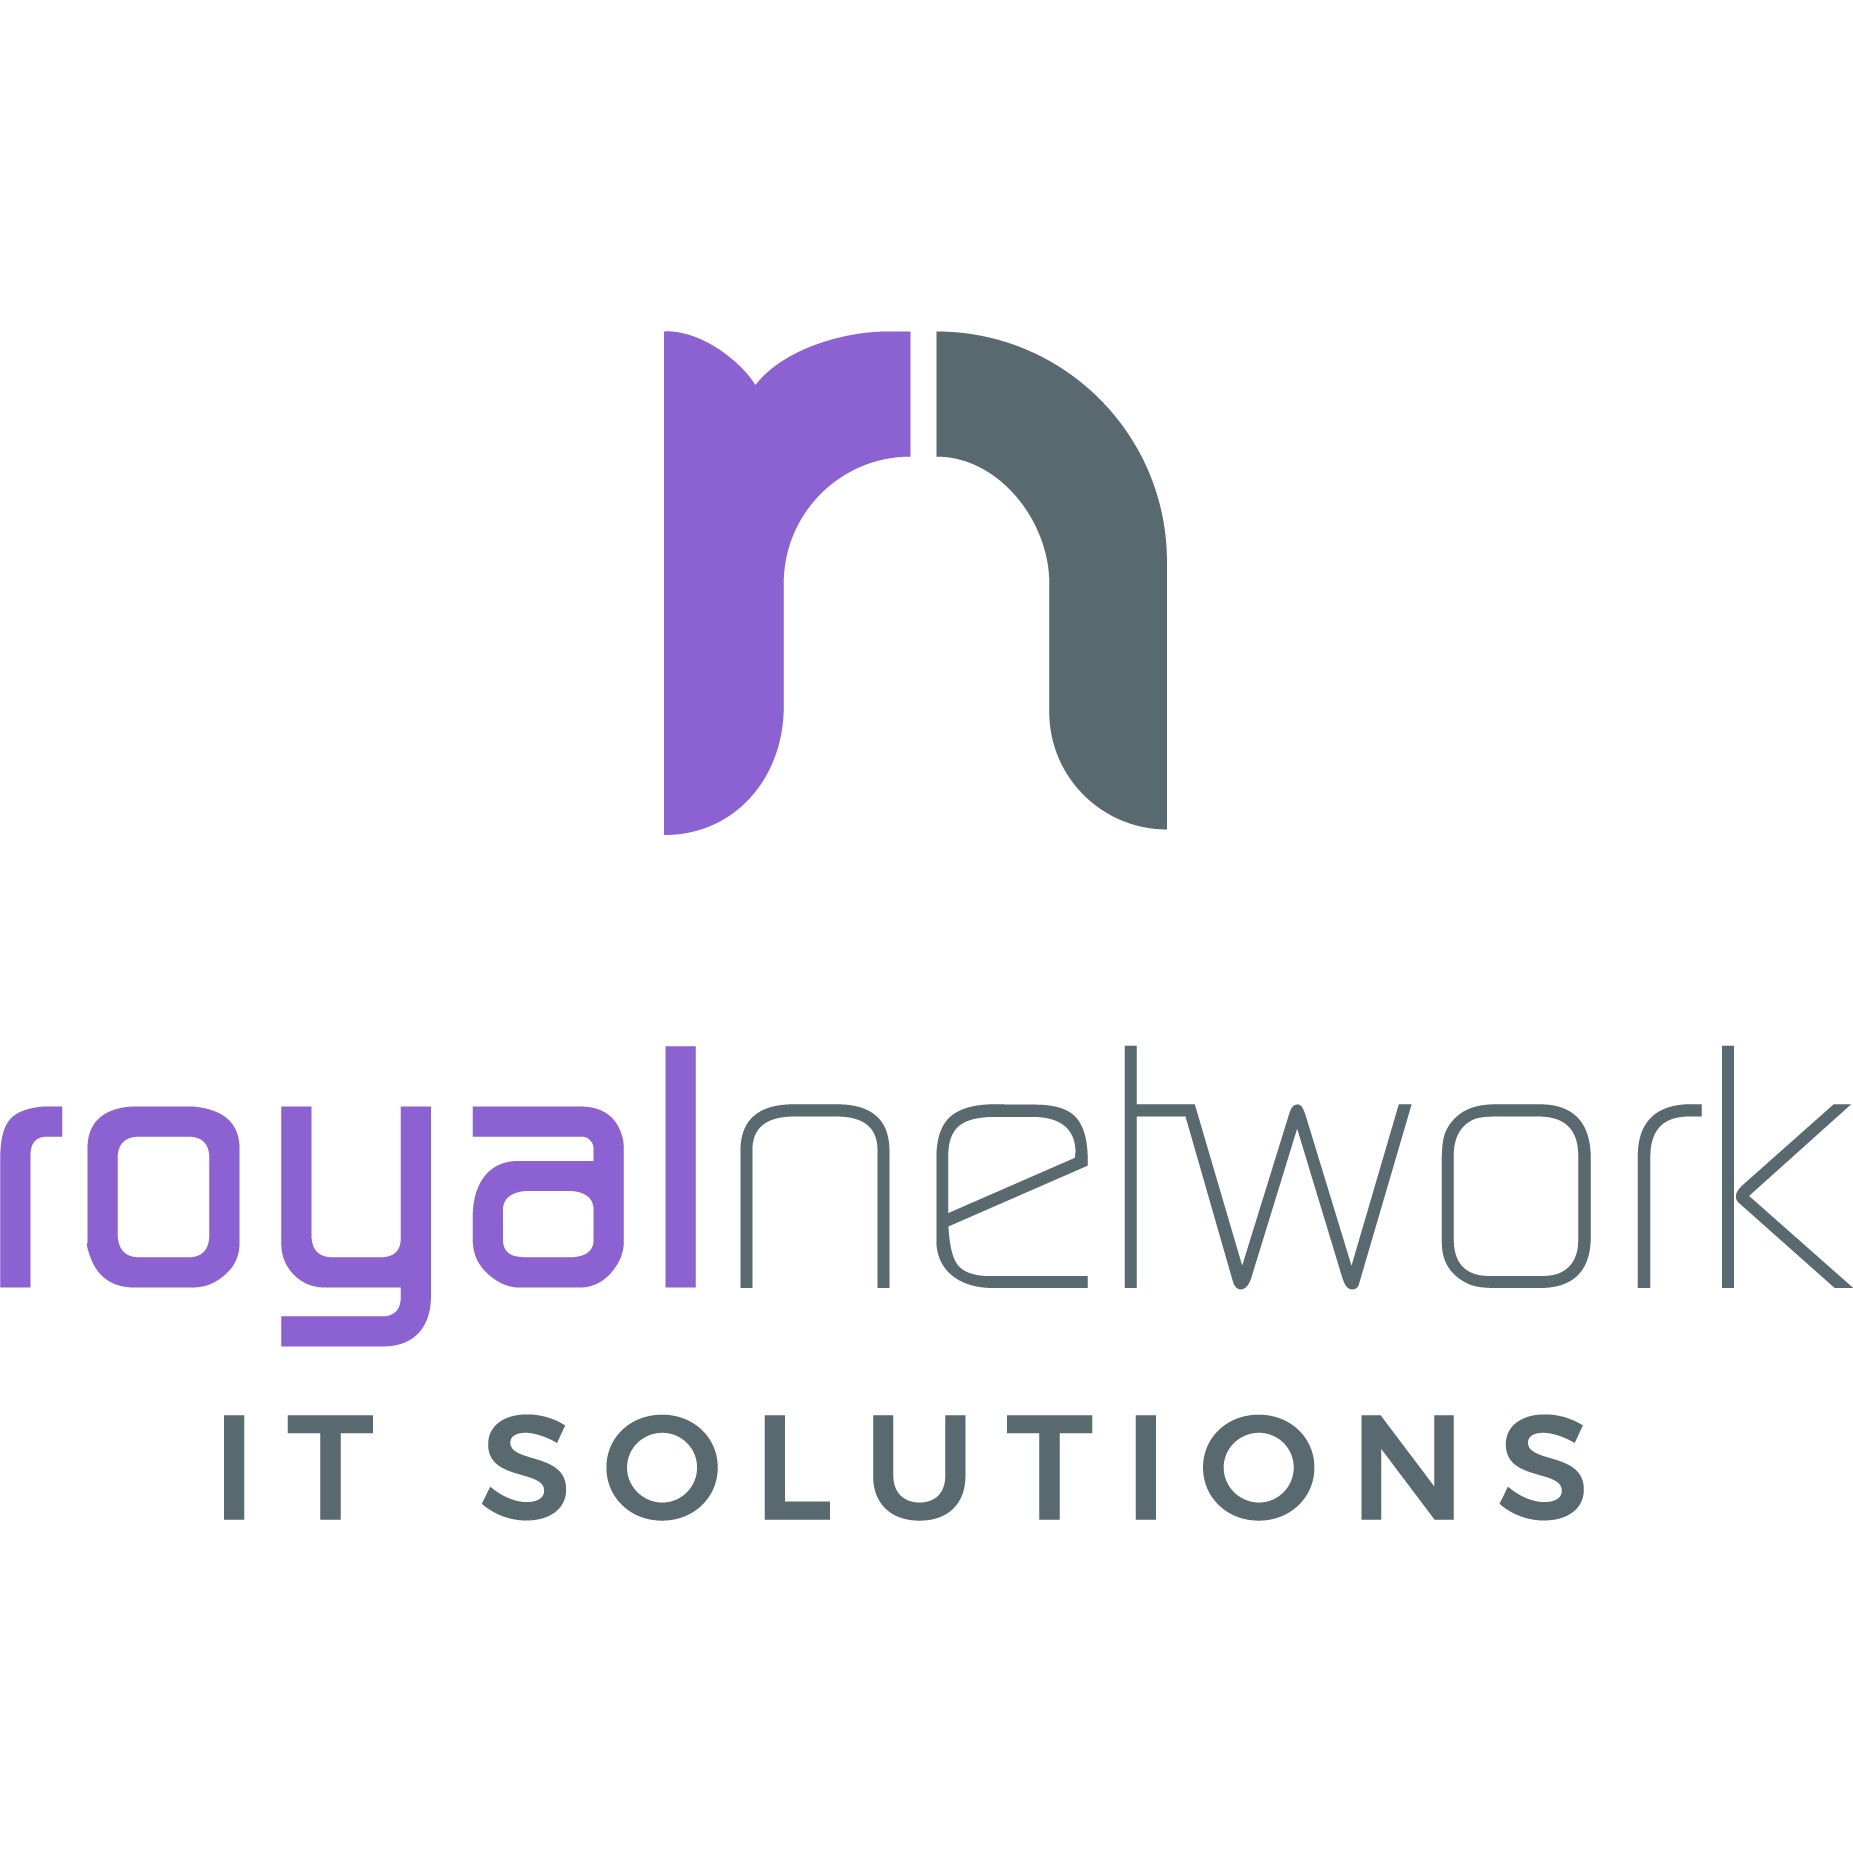 Royal Network IT Solutions, Inc.